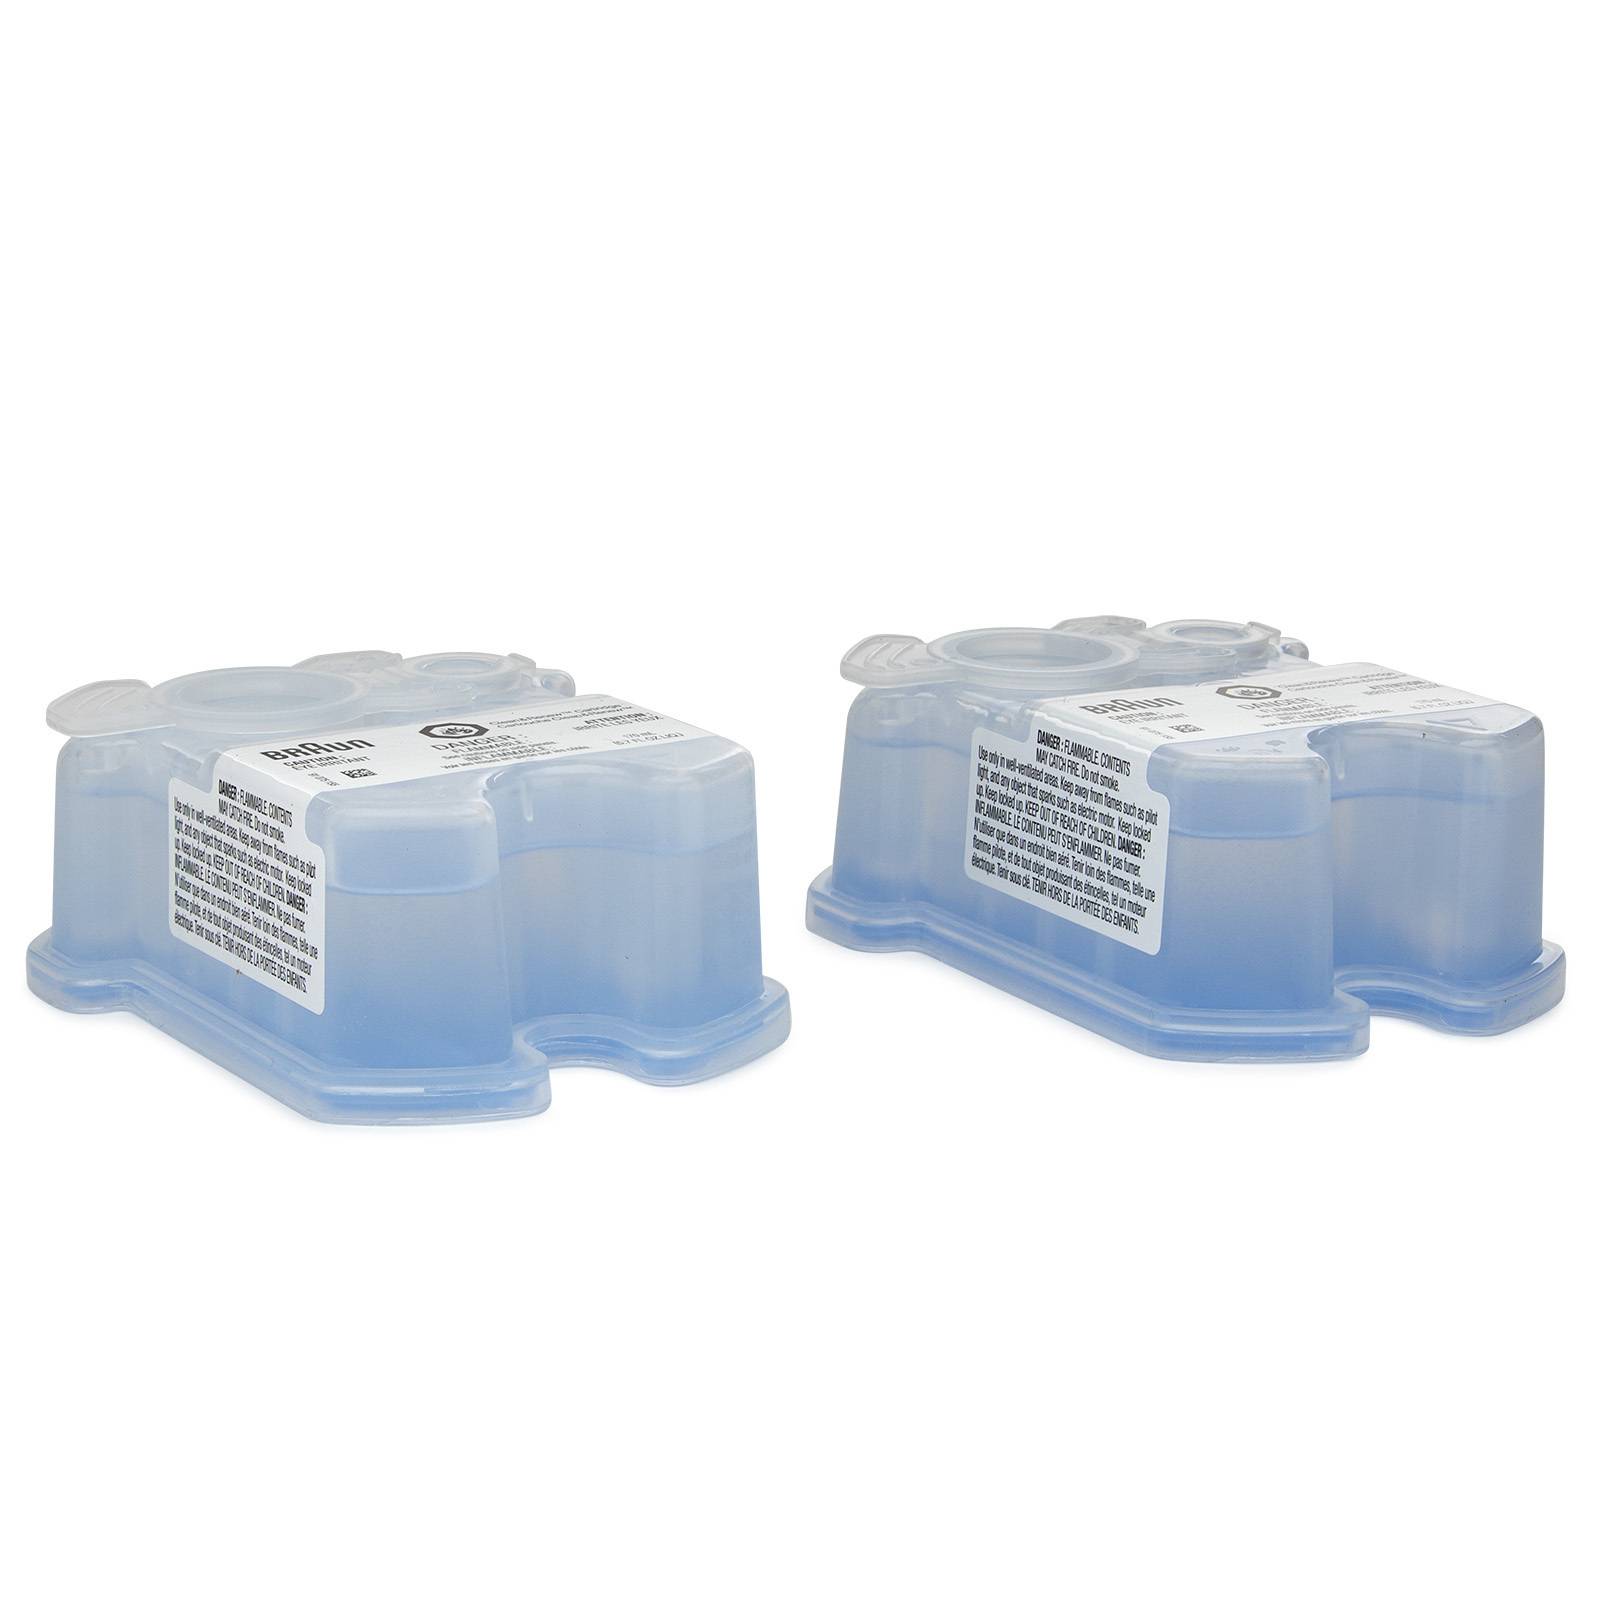 Braun Clean and Renew Refill Cartridges (2-Pack)